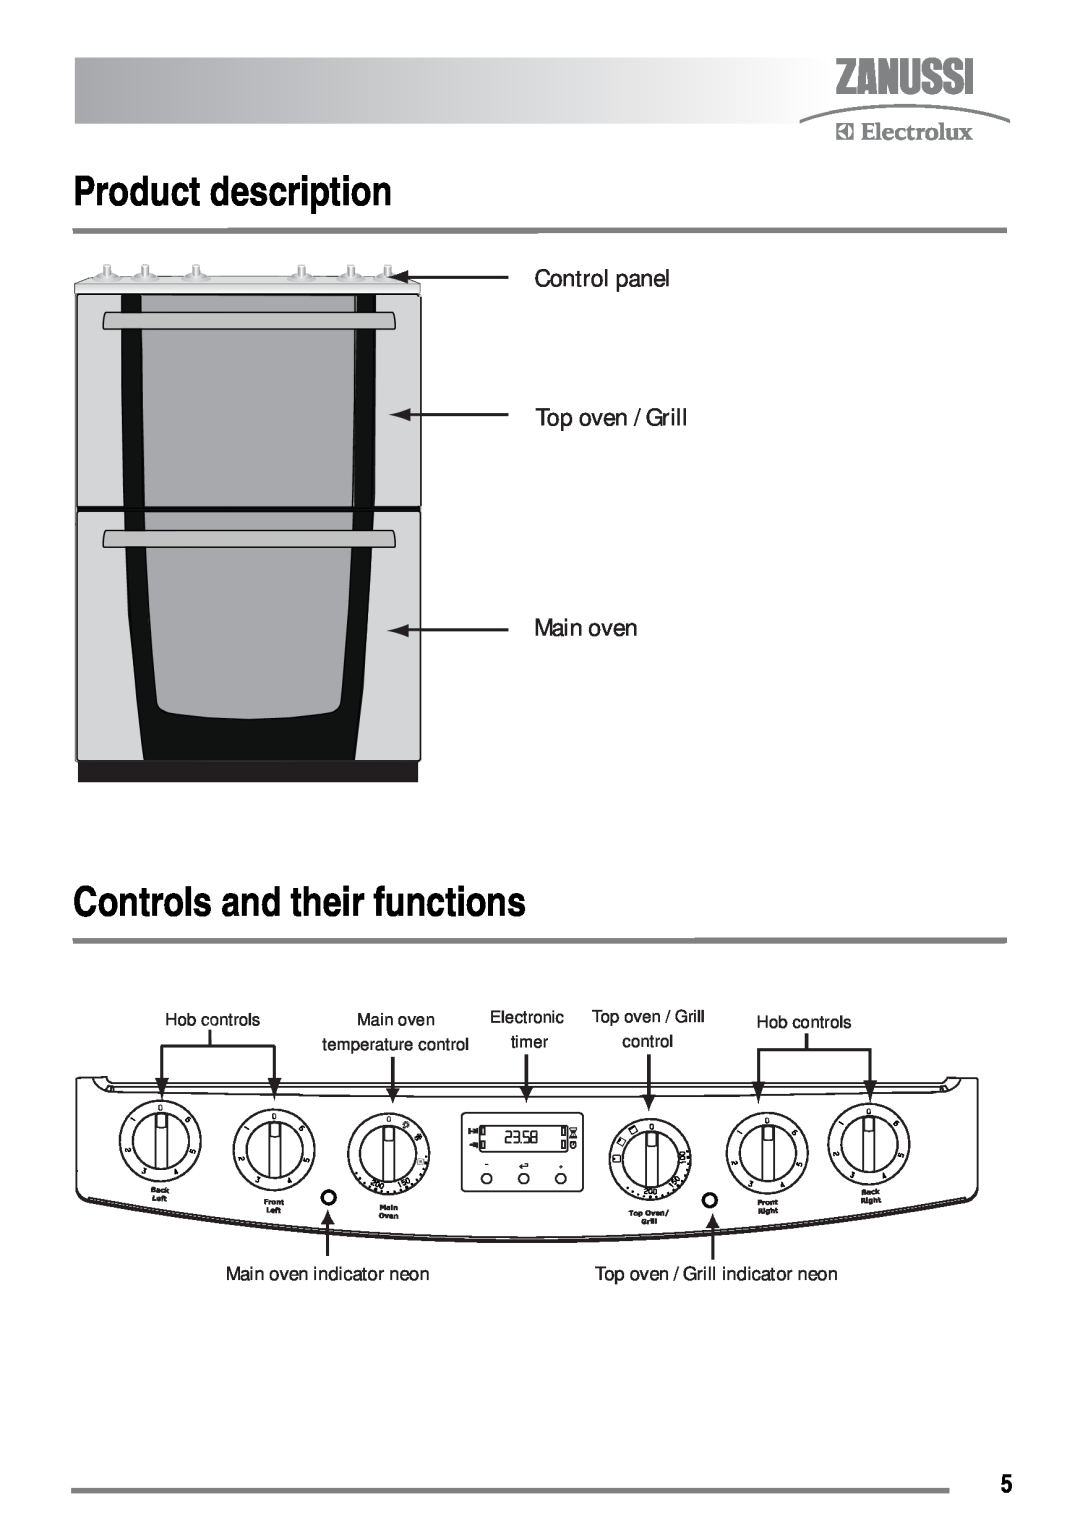 Zanussi ZKC5540 Product description, Controls and their functions, Control panel Top oven / Grill Main oven, Electronic 